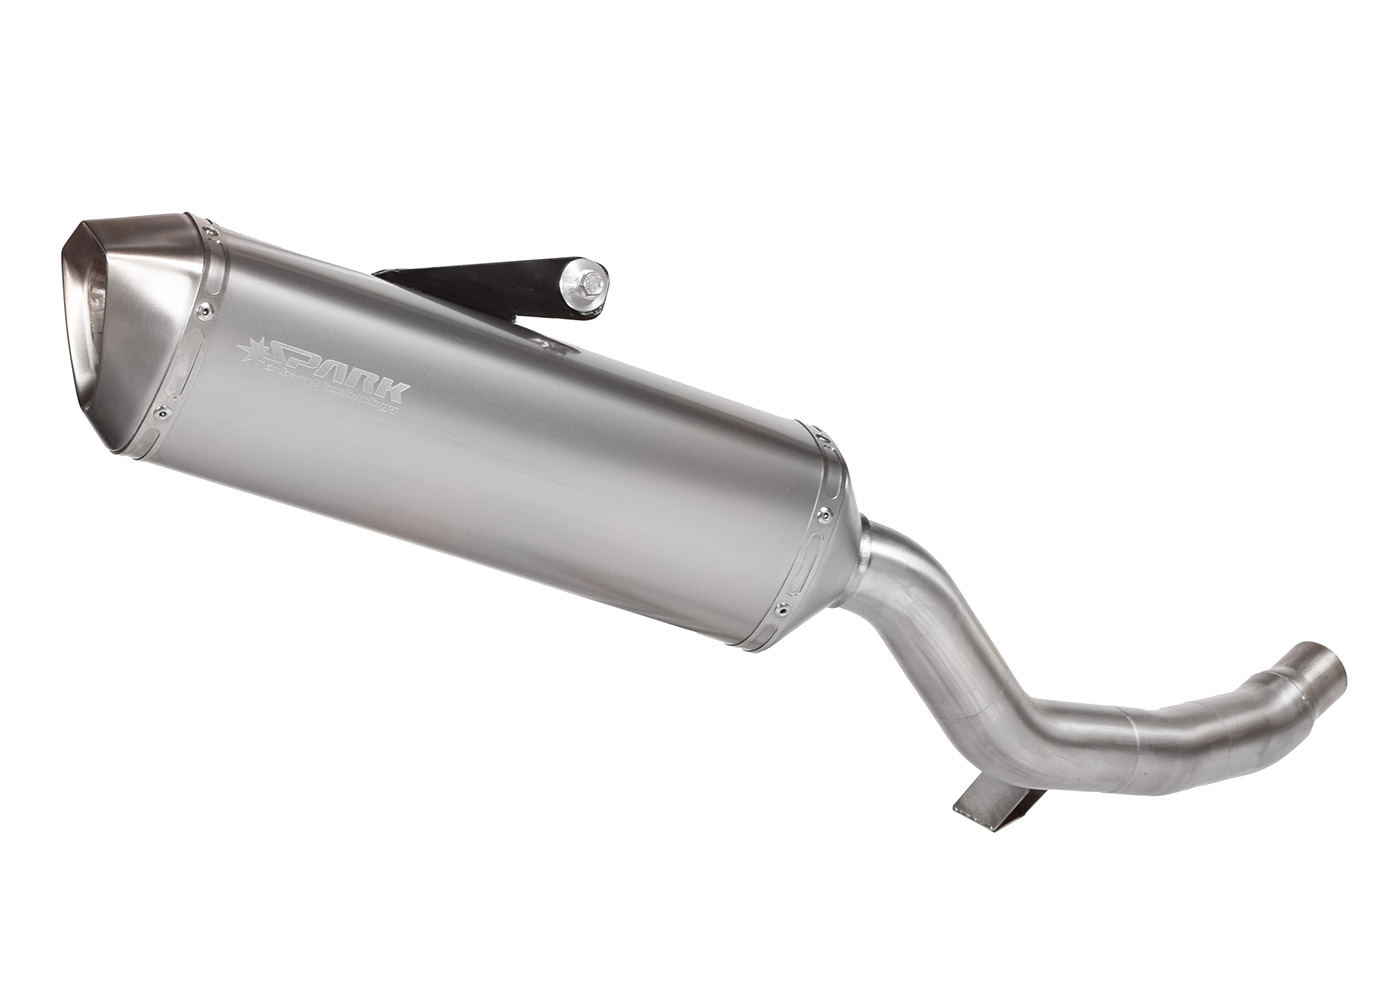 Exhaust systems for Triumph | SPARK Exhaust technology